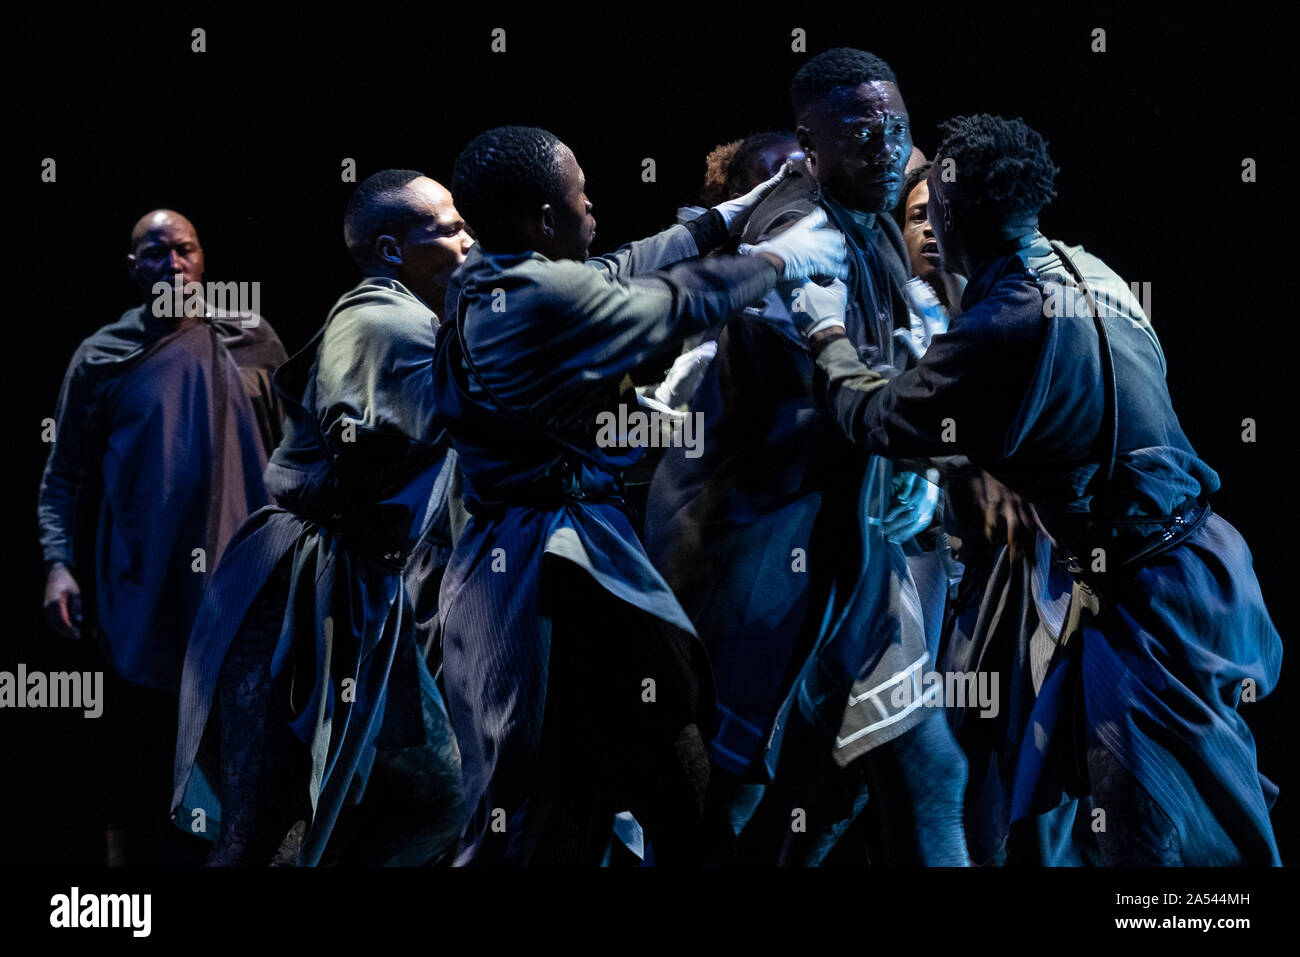 London, UK. 17th Oct 2019. Performance of “Cion - A Requiem to Ravel's Bolero” by Gregory Maqoma at Barbican Theatre, part of Dance Umbrella 2019. Joined by performers from Vuyani Dance Theatre, Maqoma embodies a professional mourner ‘Toloki’ - a character inspired by the protagonist of Zakes Mda’s novels Ways of Dying and Cion – which stands for hope against the darkness. The performance unfolds to Ravel’s Bolero, reinterpreted through percussion and voice by a South African Isicathamiya (a cappella) choir. Maqoma’s third Dance Umbrella appearance since 2015. Credit: Guy Corbishley Stock Photo